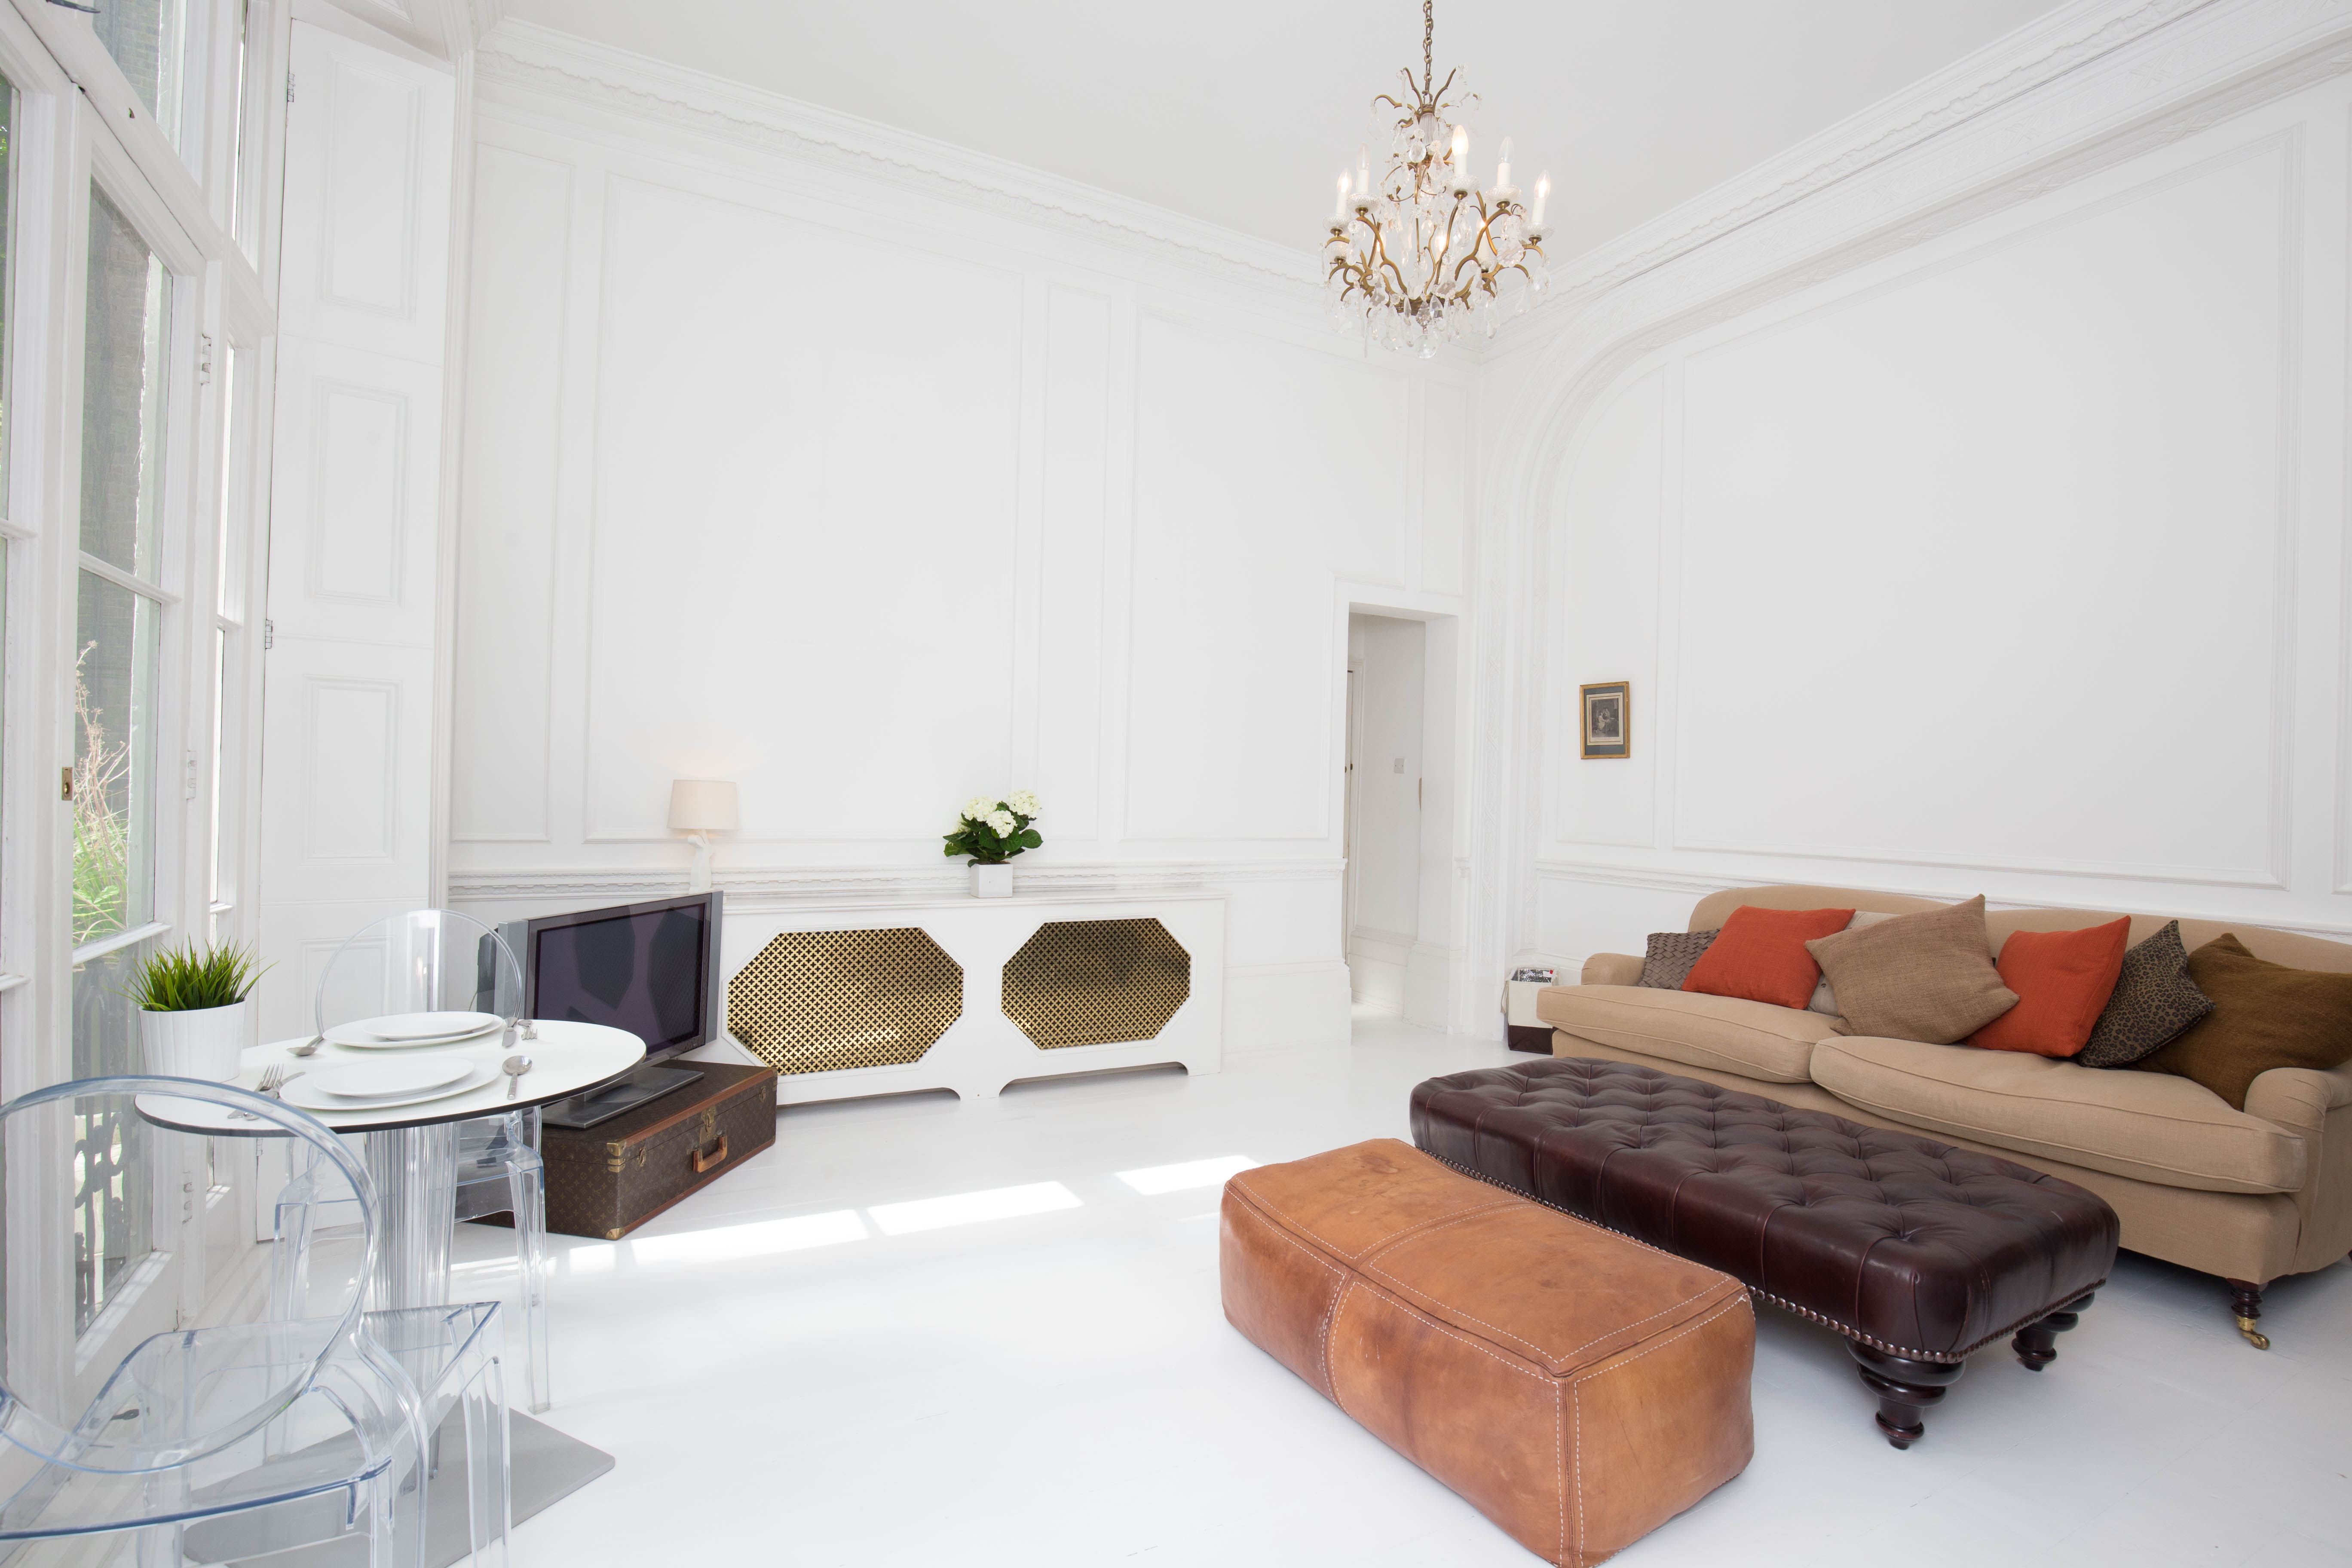 Lovelydays Luxury Rentals introduce Craven Hill flat in the center of London.